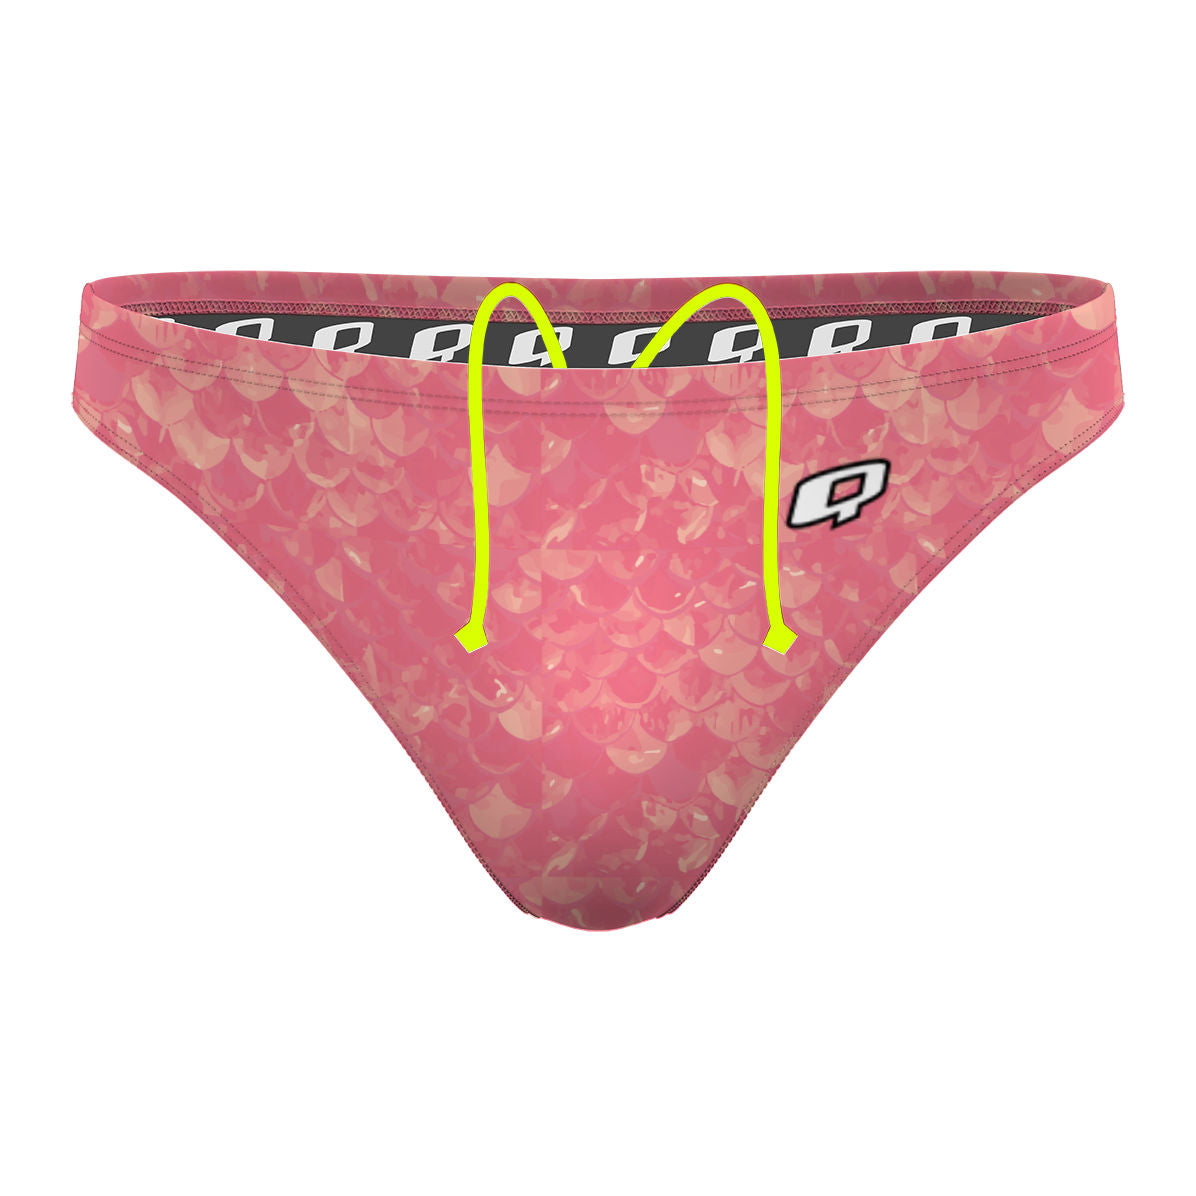 Mighty Mermaid - Waterpolo Brief Swimsuit